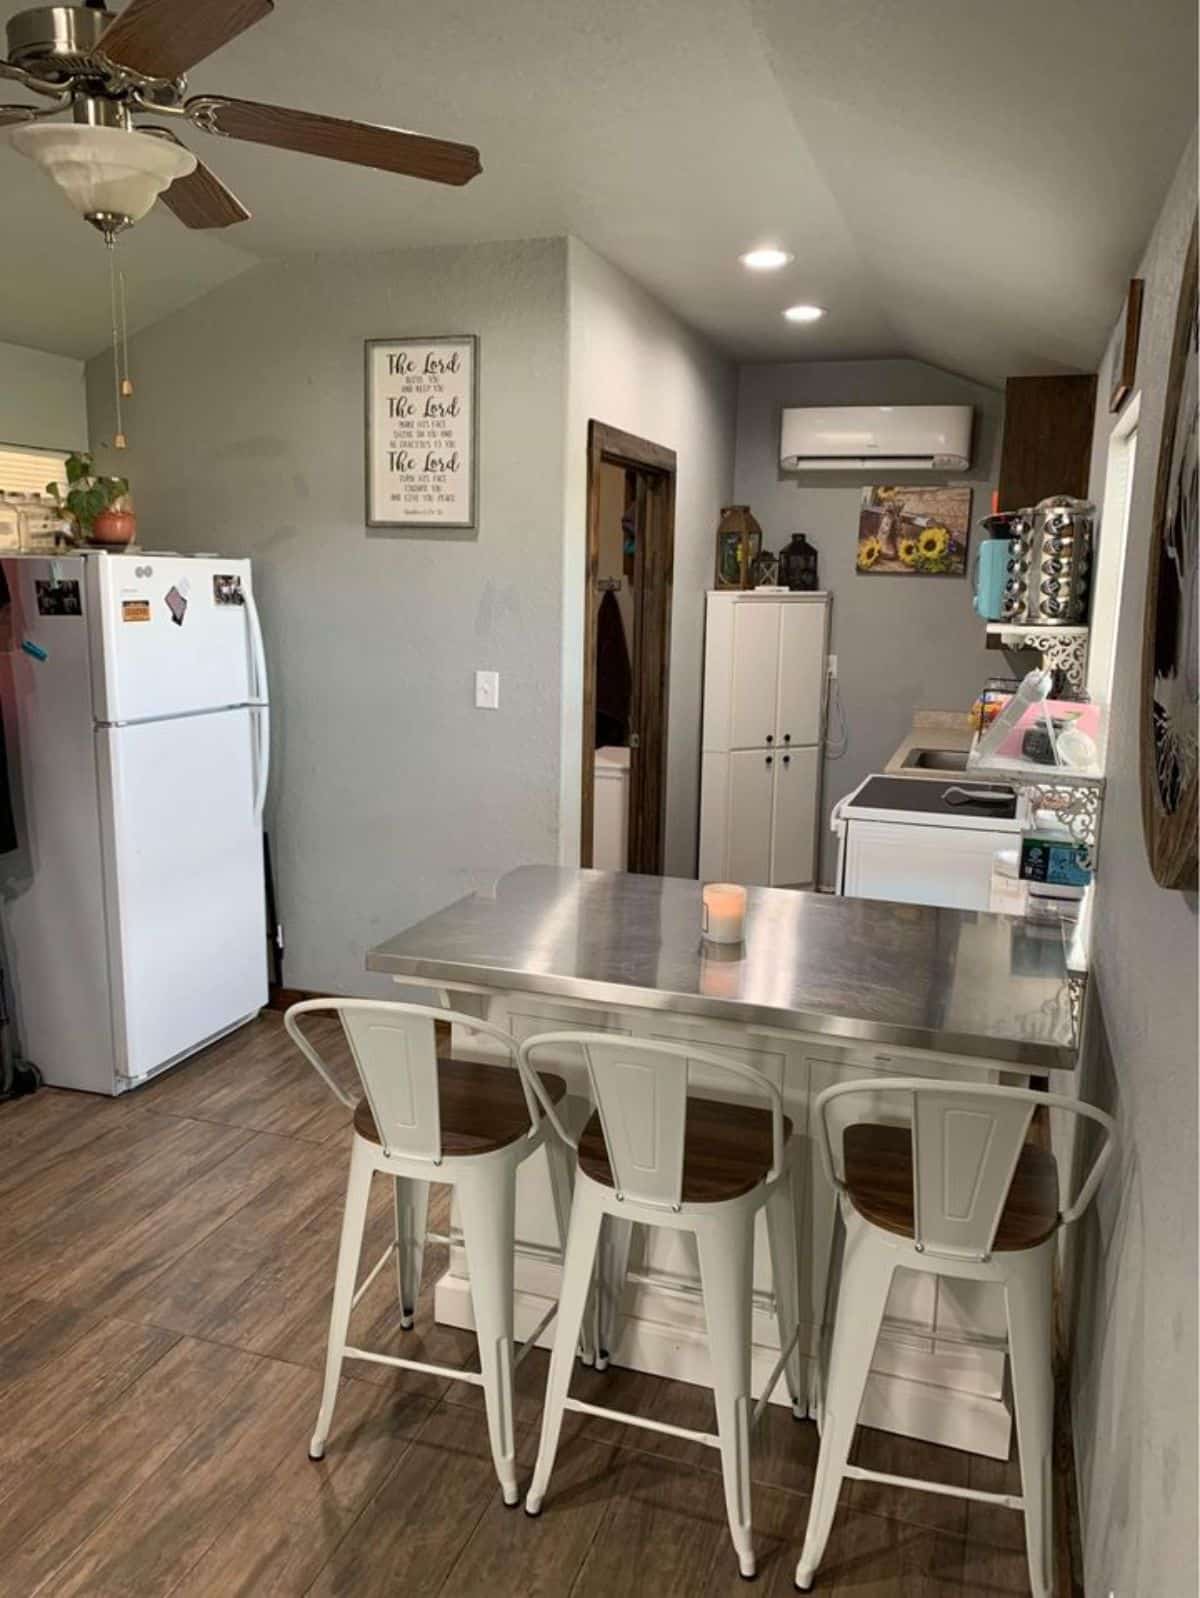 3 chair dining table in between living and kitchen area